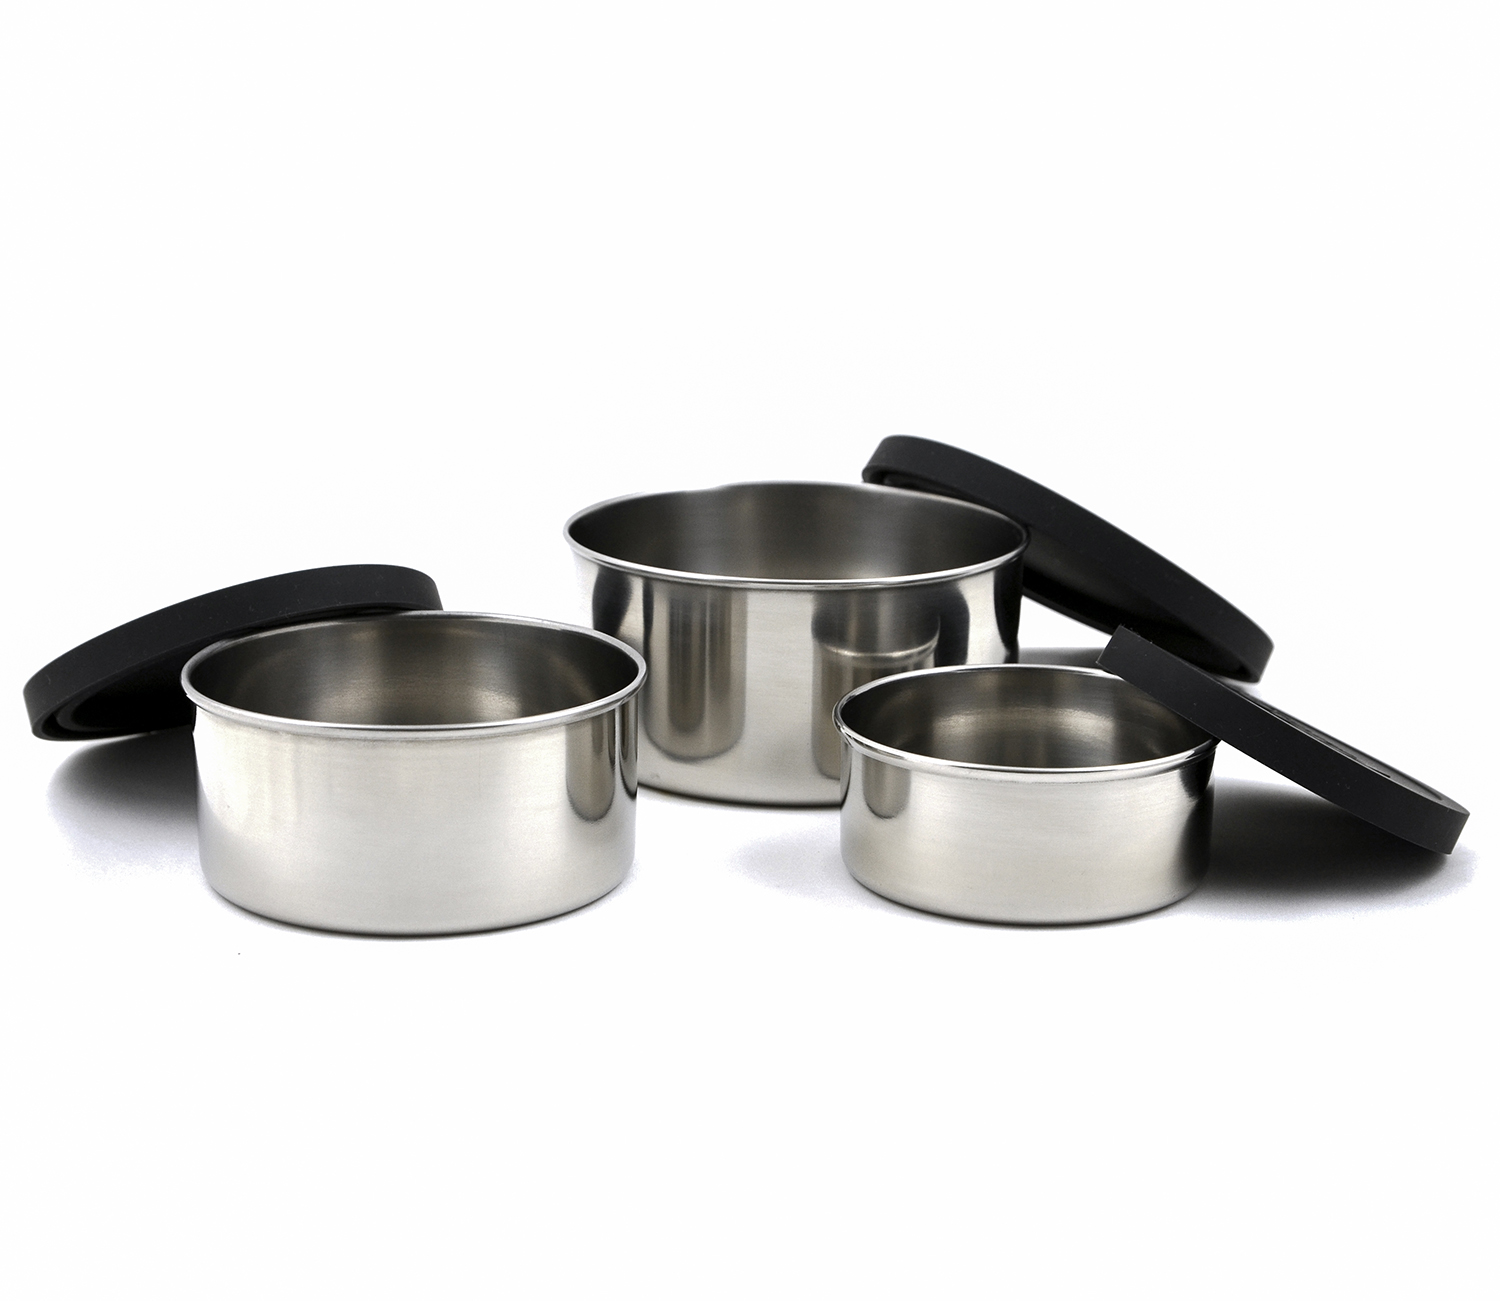 Made Sustained Round Stainless Steel Container - 3-Pack